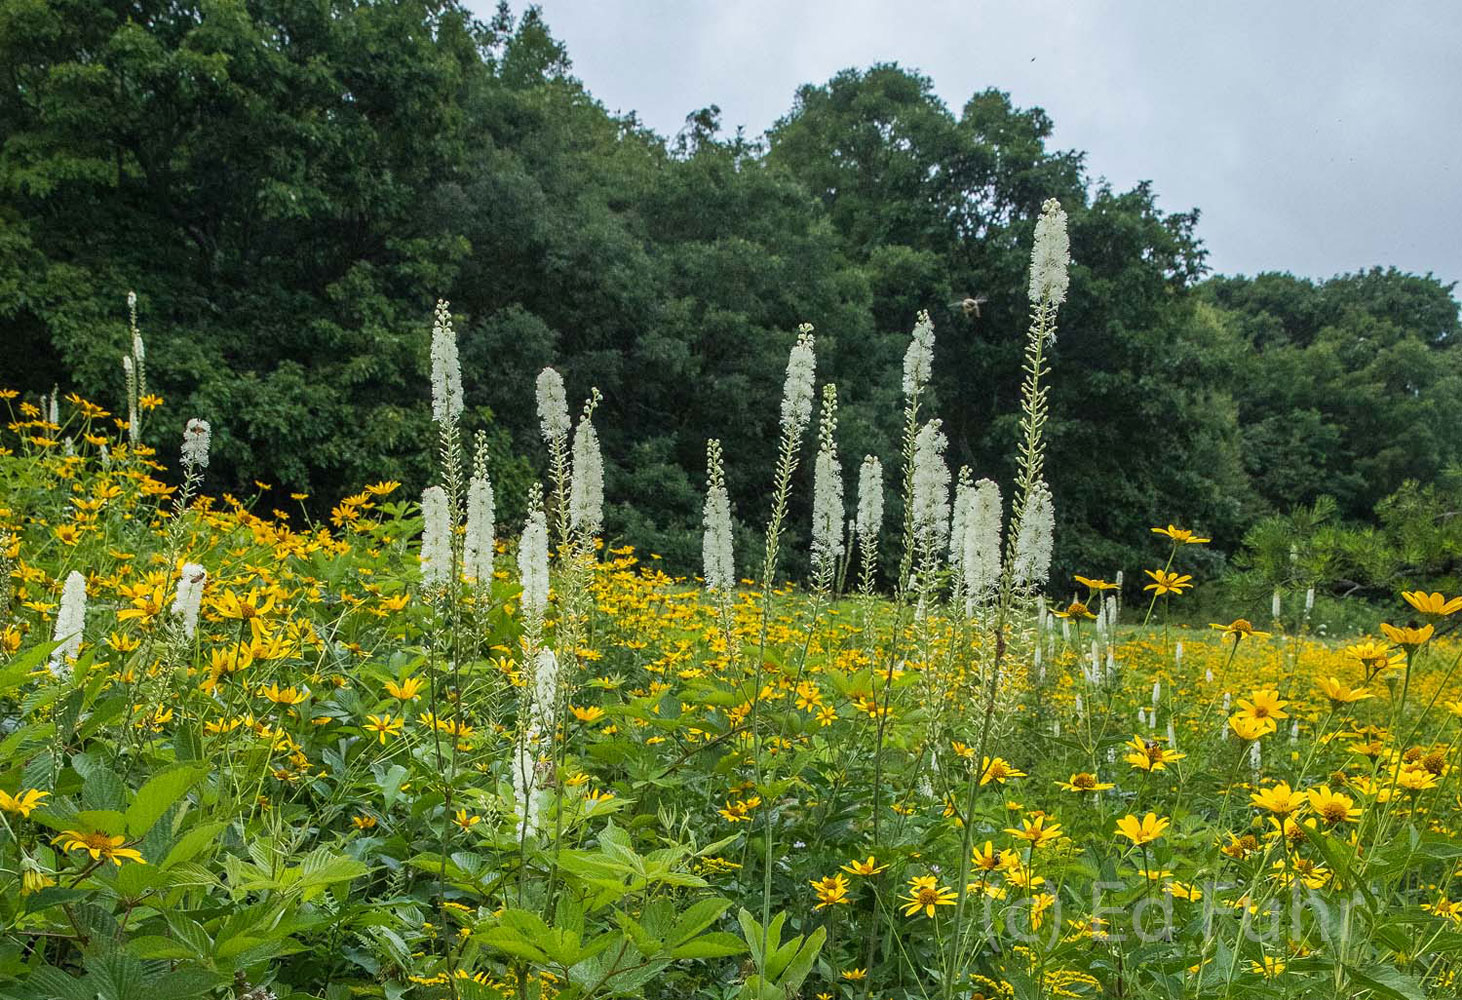 The slender flowering spikes of black cohosh invite us into Big Meadows and the forest's edge.